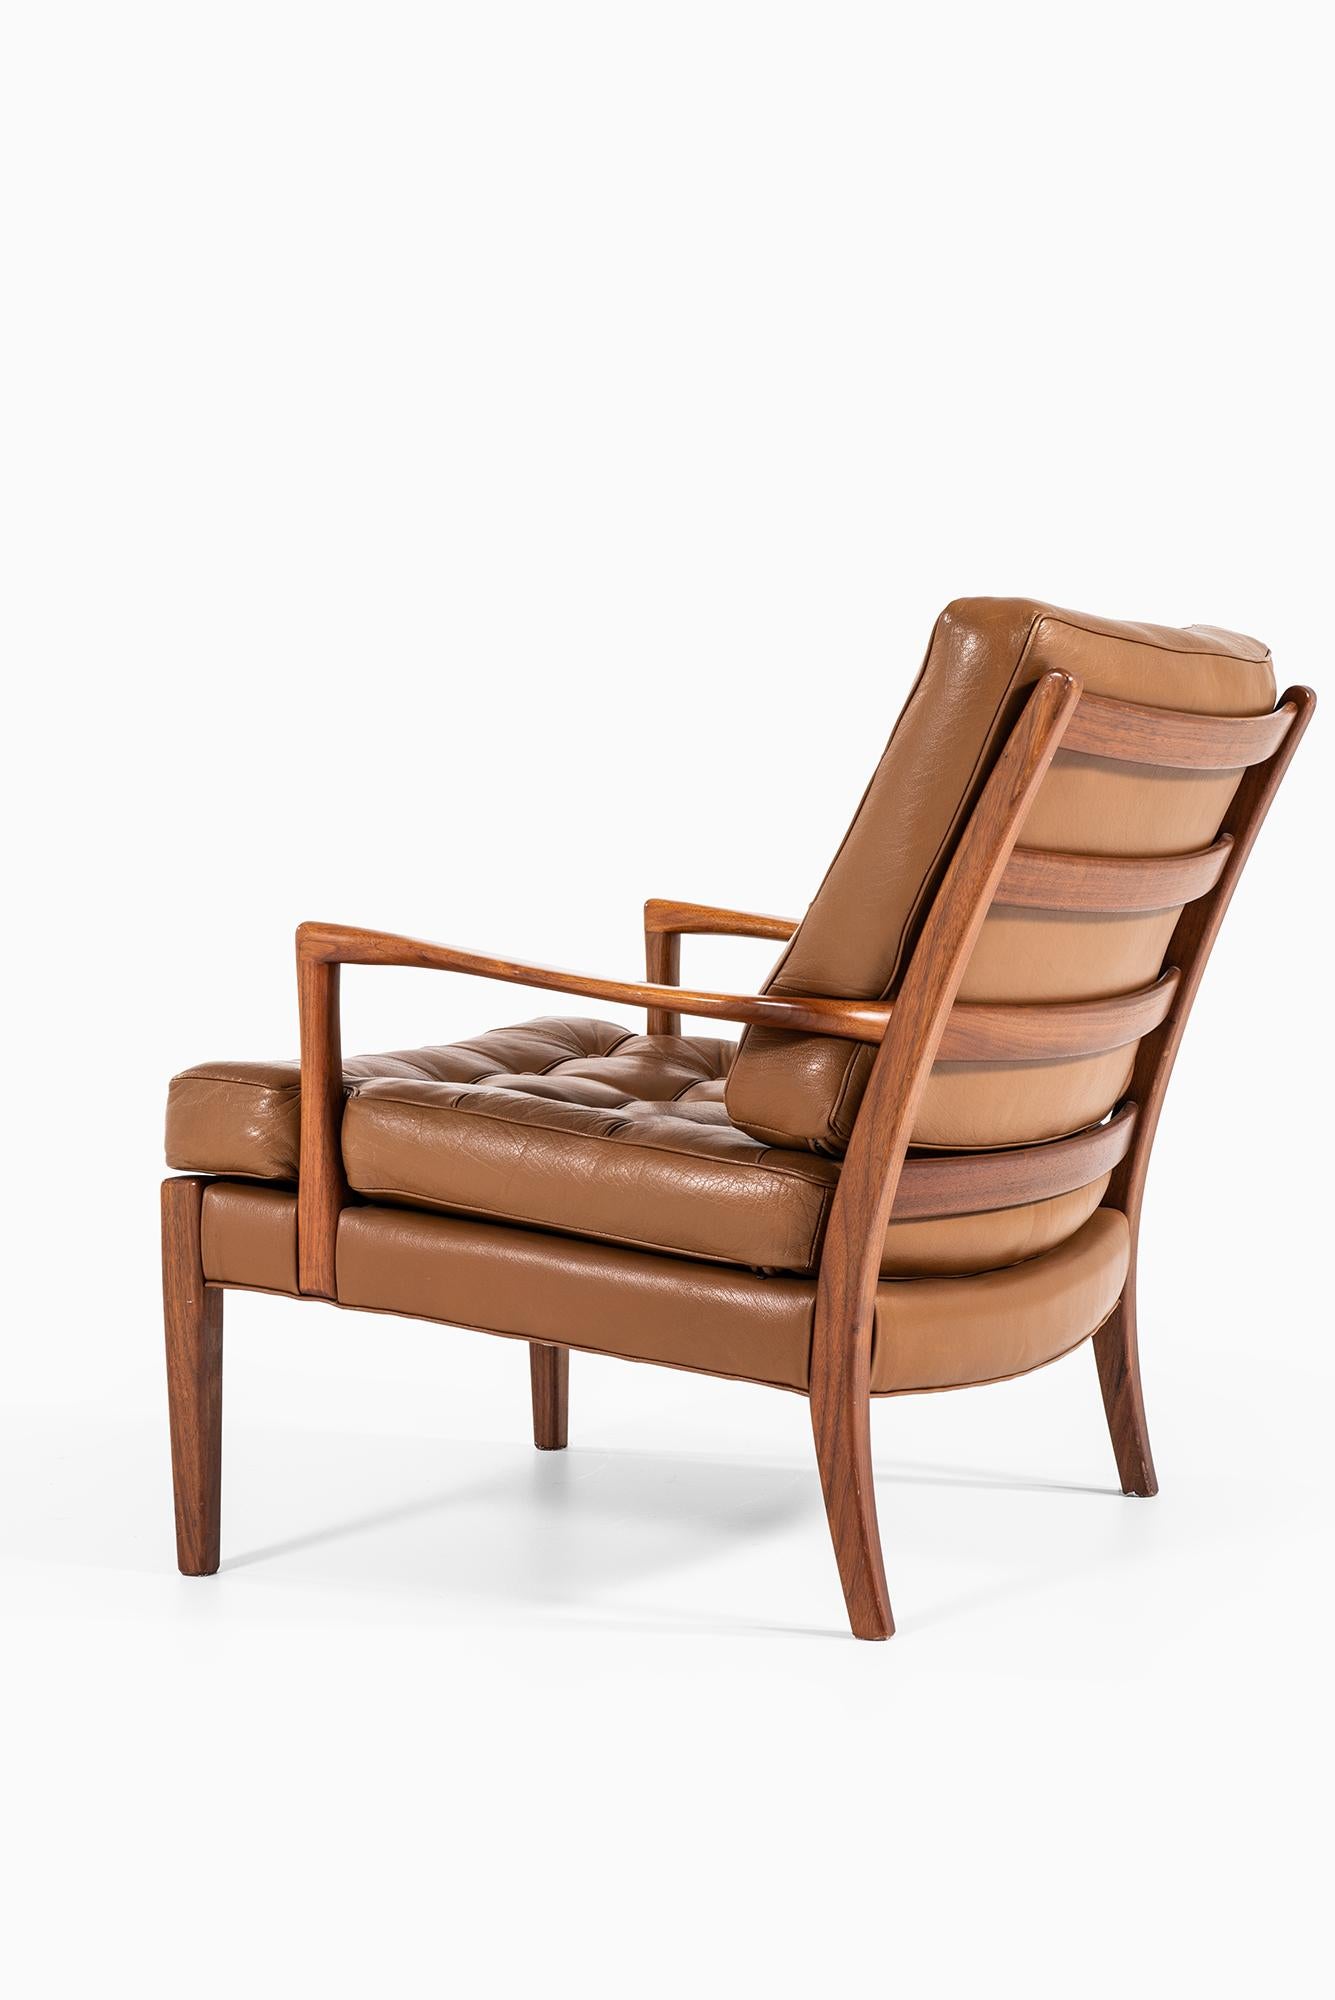 Mid-20th Century Arne Norell Easy Chair Model Löven by Arne Norell Ab in Sweden For Sale